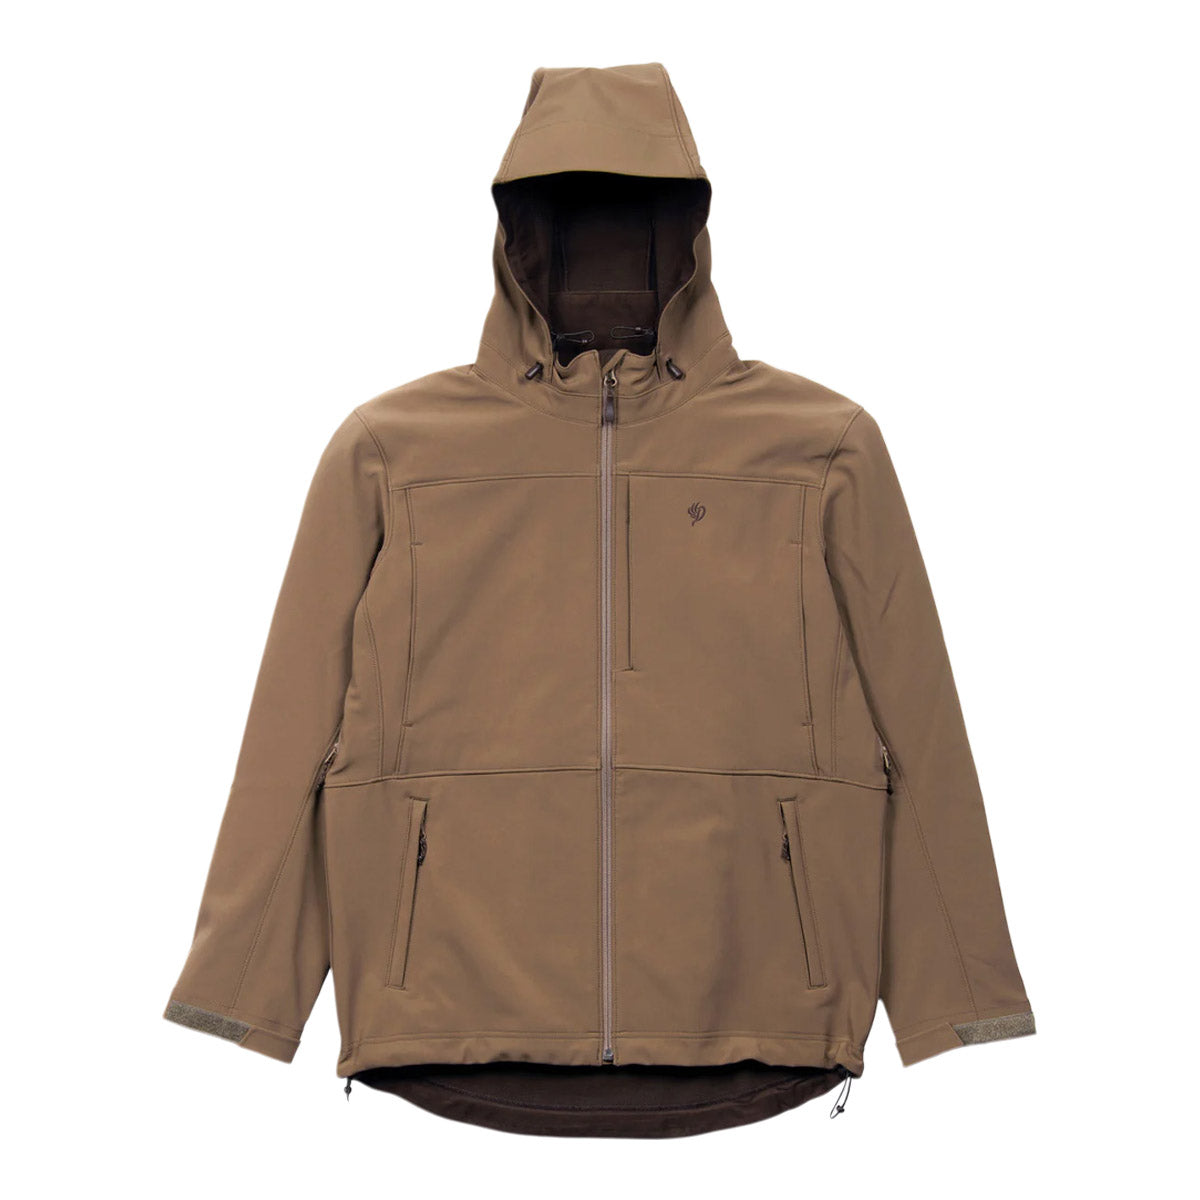 Duck Camp Contact Softshell Jacket